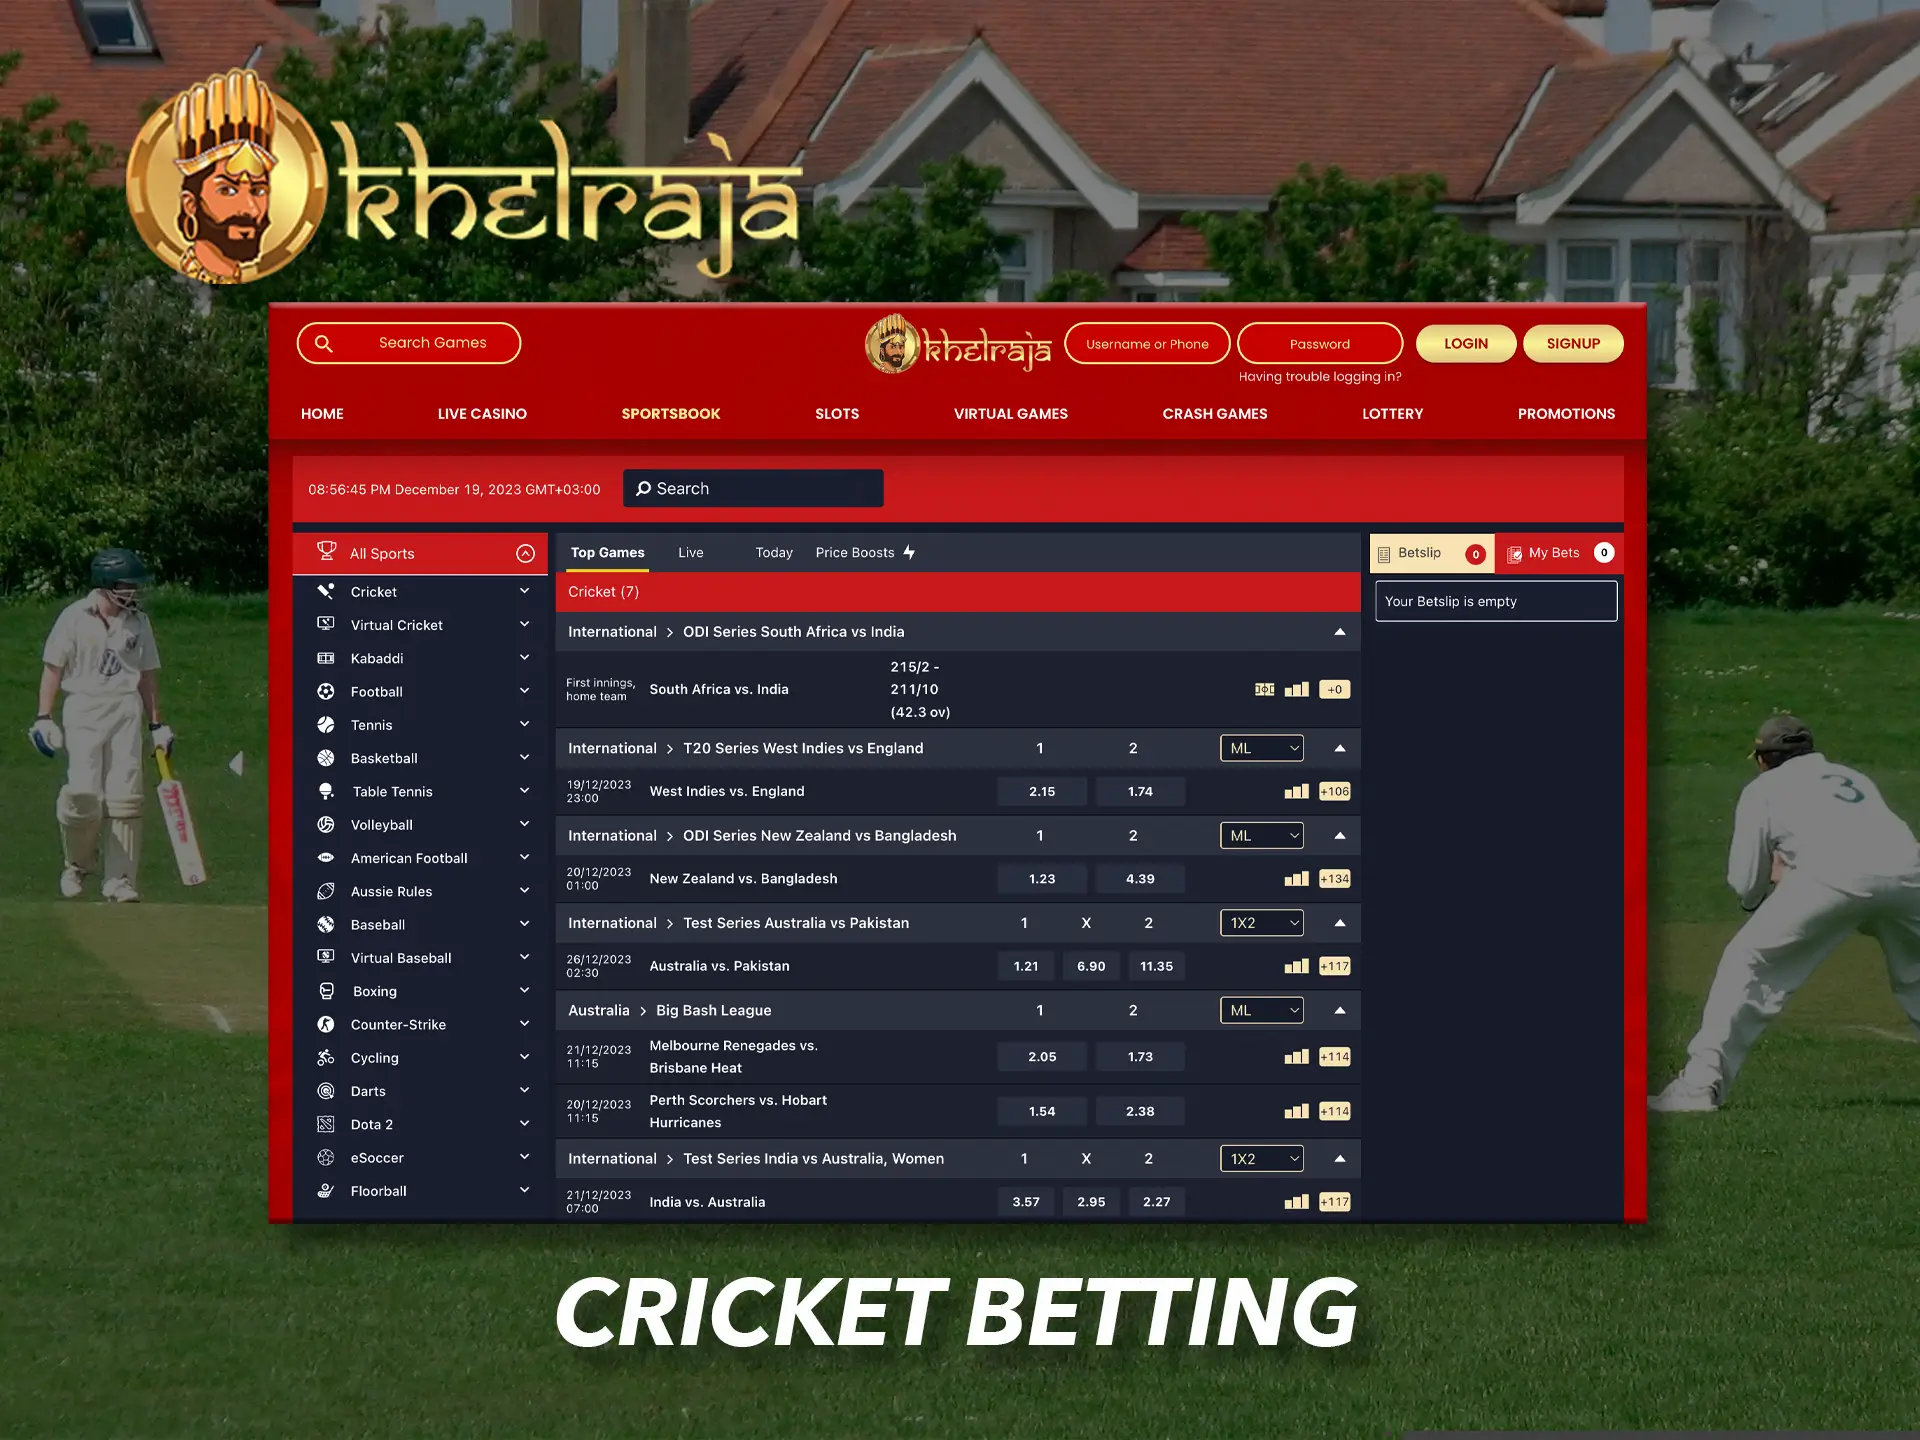 The most famous cricket tournaments are featured at Khelraja bookmaker.